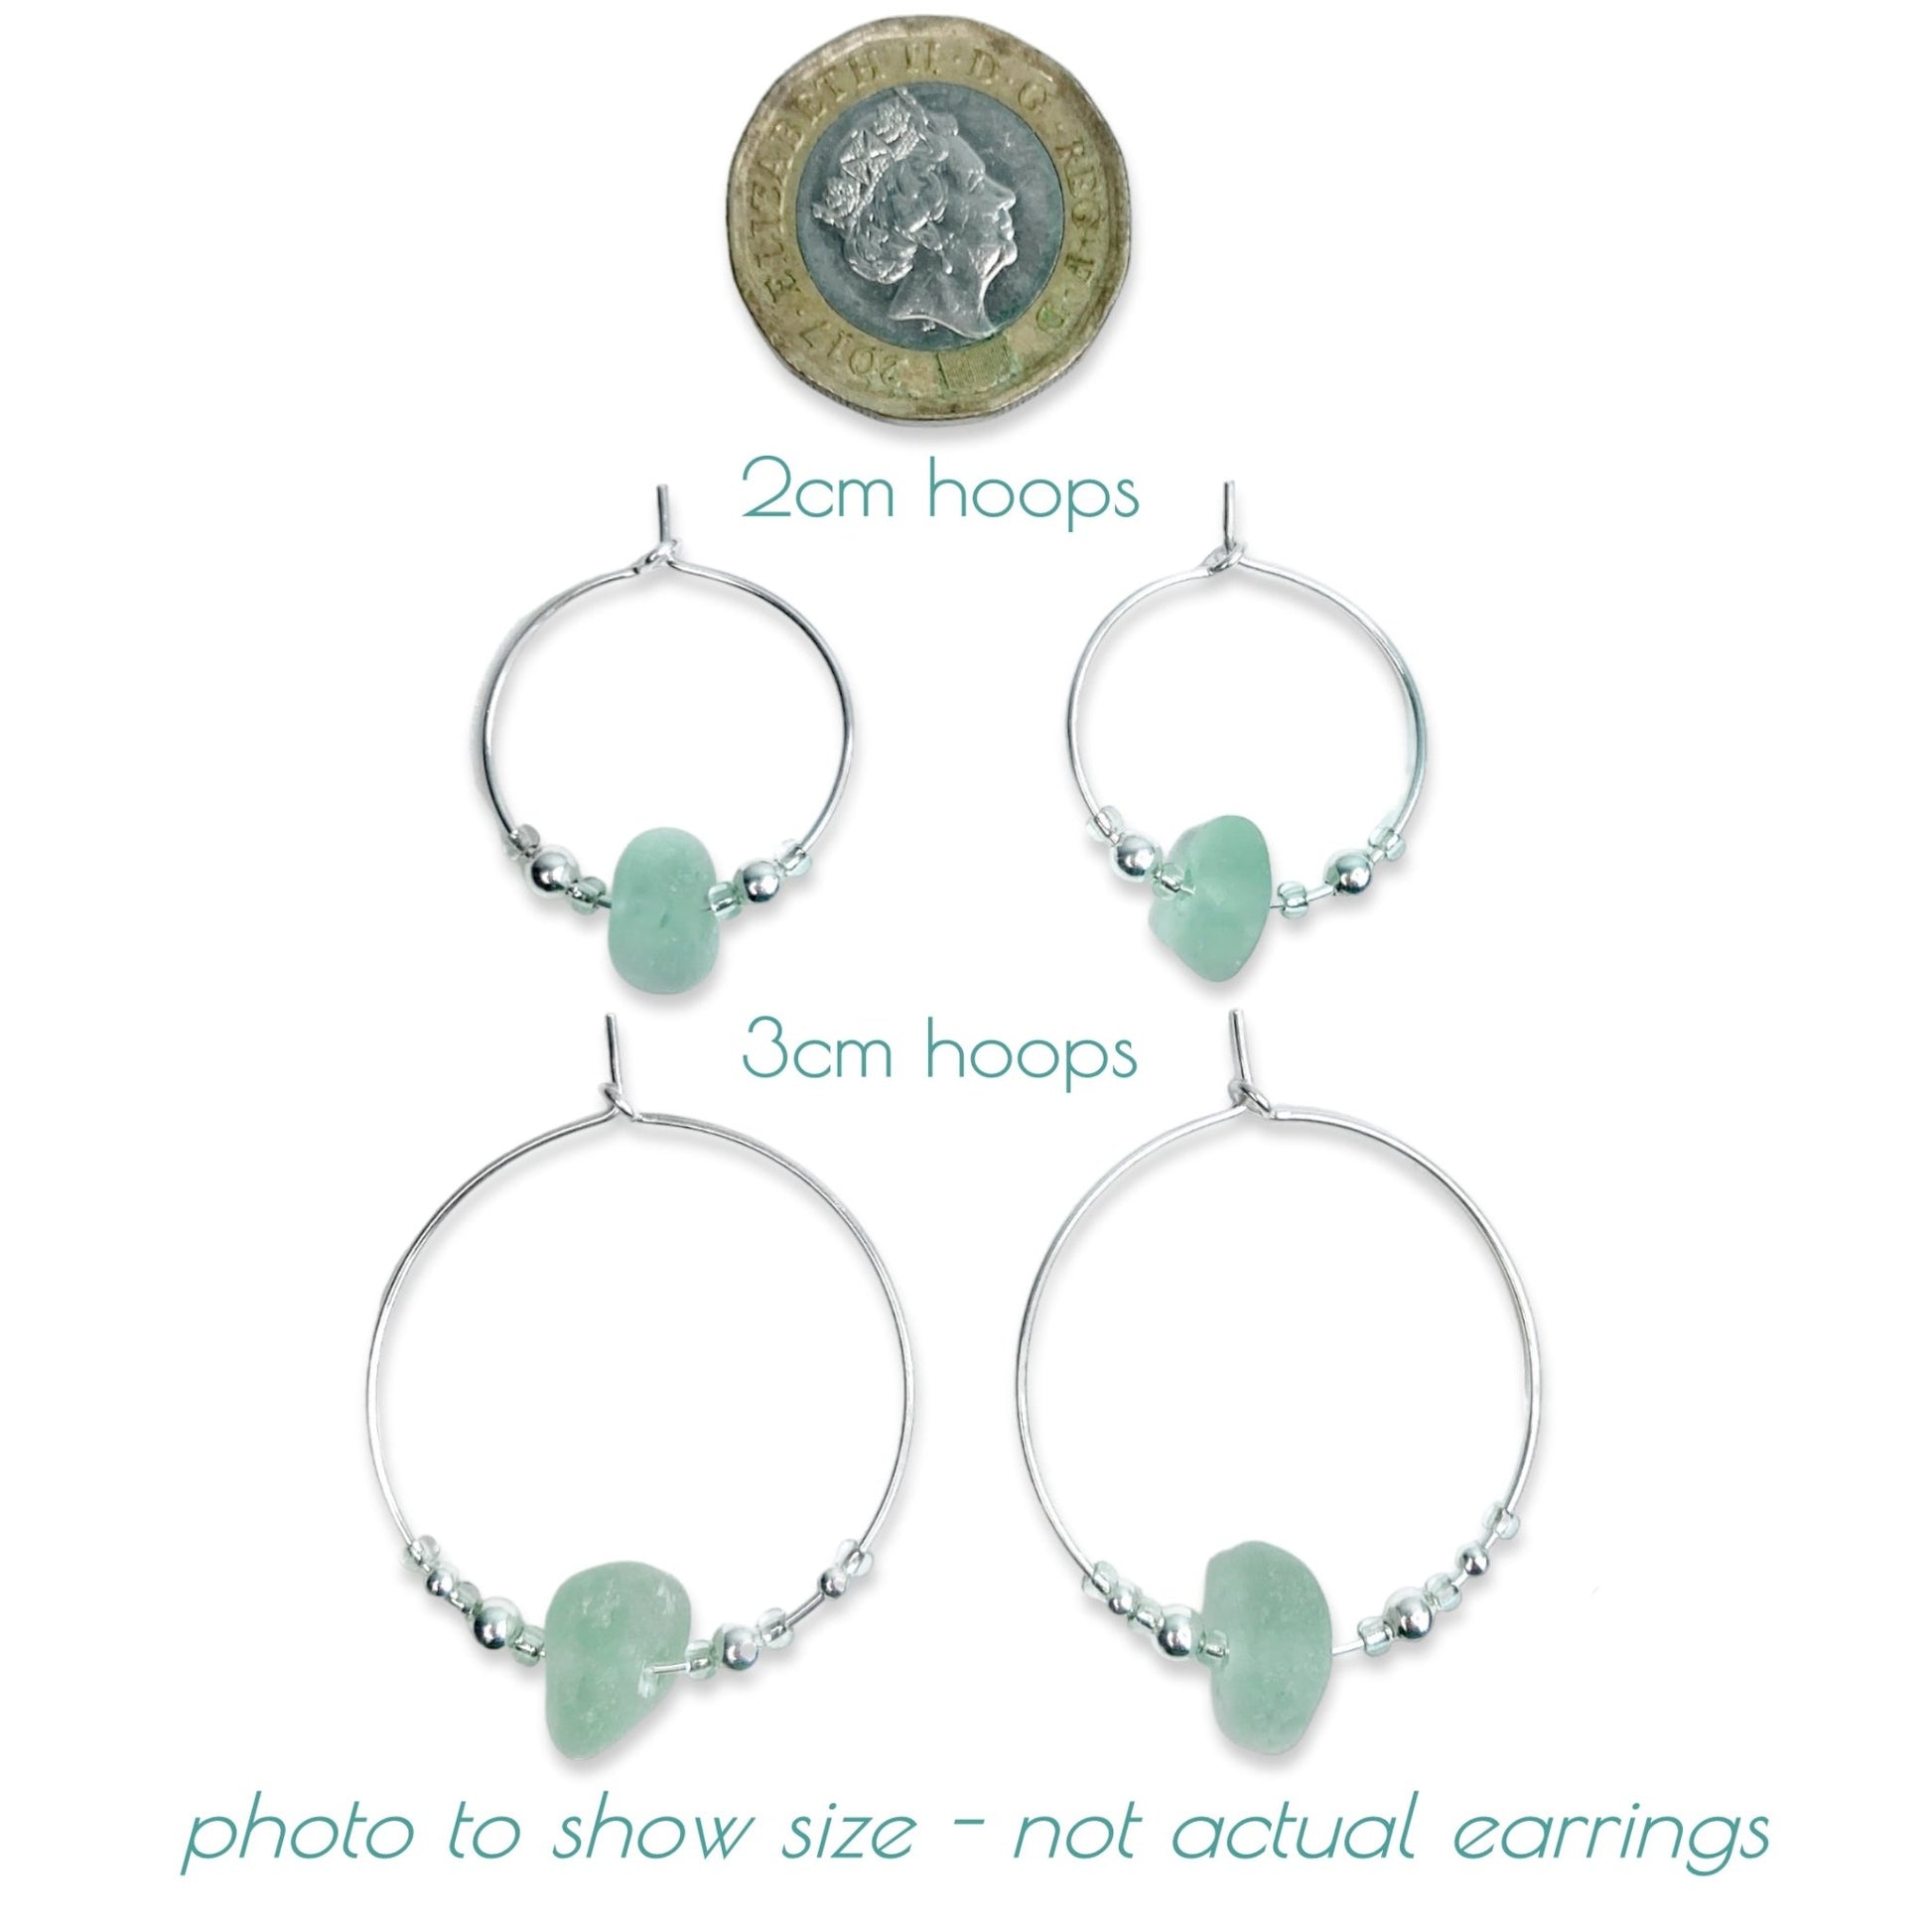 Small Green Sea Glass Hoop Earrings - 2cm Sterling Silver with Amazonite Crystal Beads - East Neuk Beach Crafts